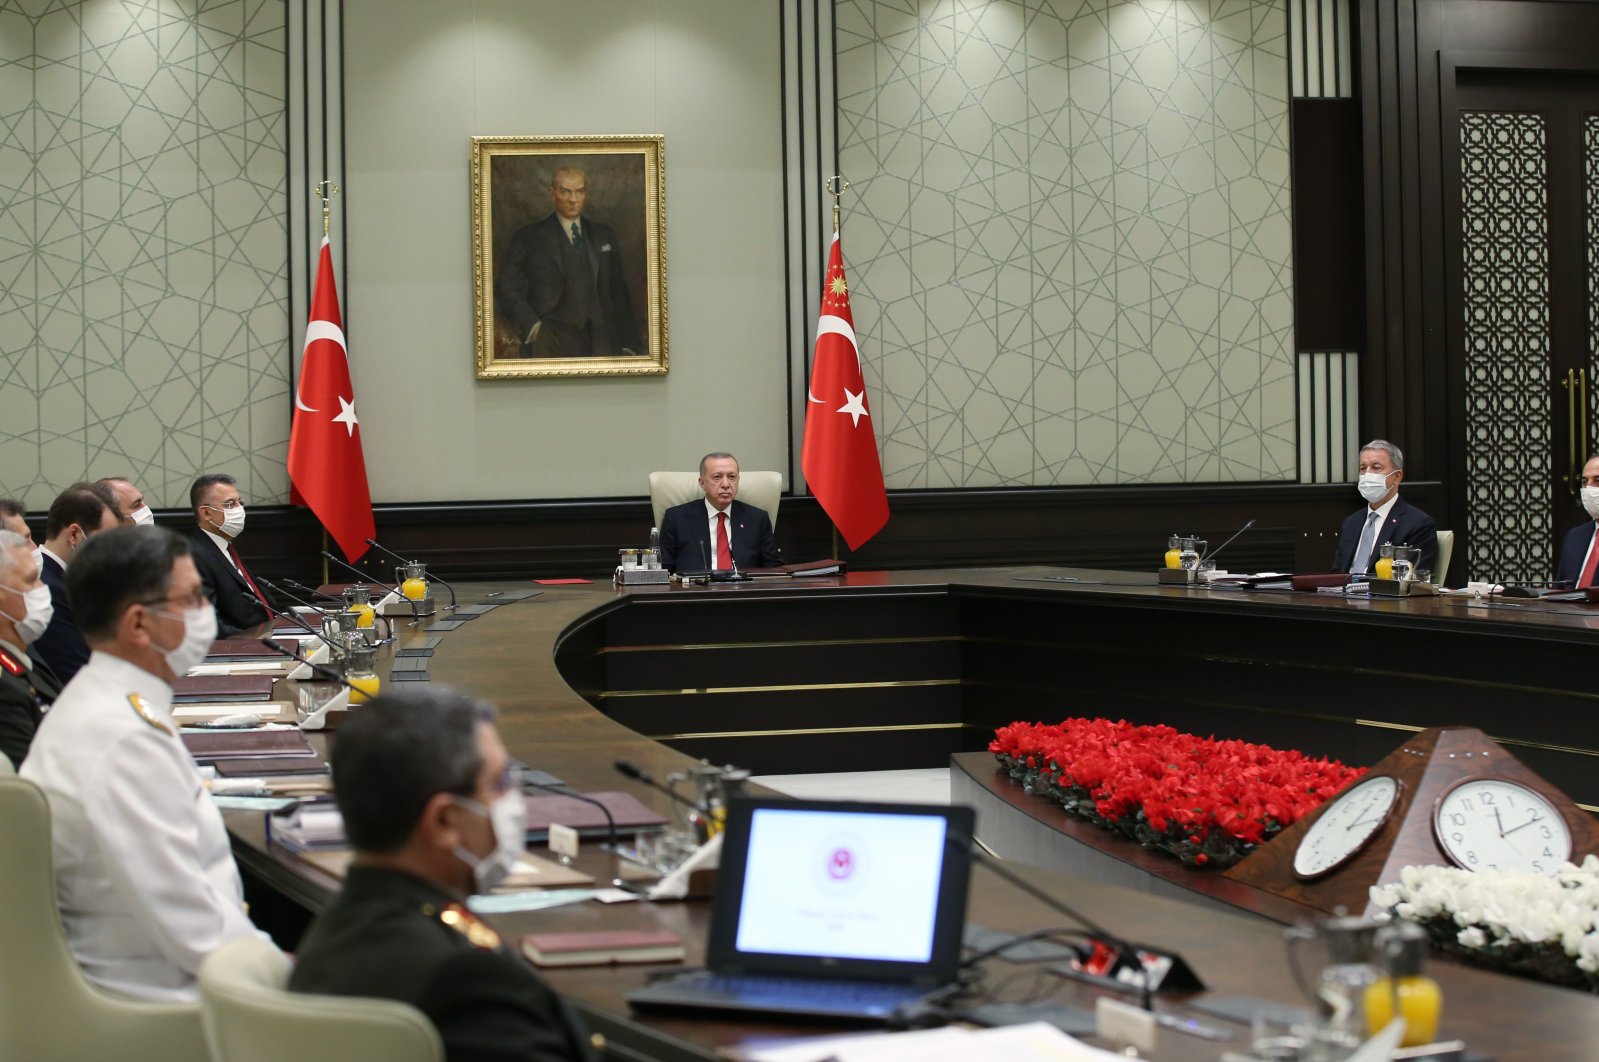 President Recep Tayyip Erdoğan and other high-ranking officials attend a Supreme Military Council meeting in the Presidential Complex, Ankara, Turkey, July 23, 2020. (AA Photo)